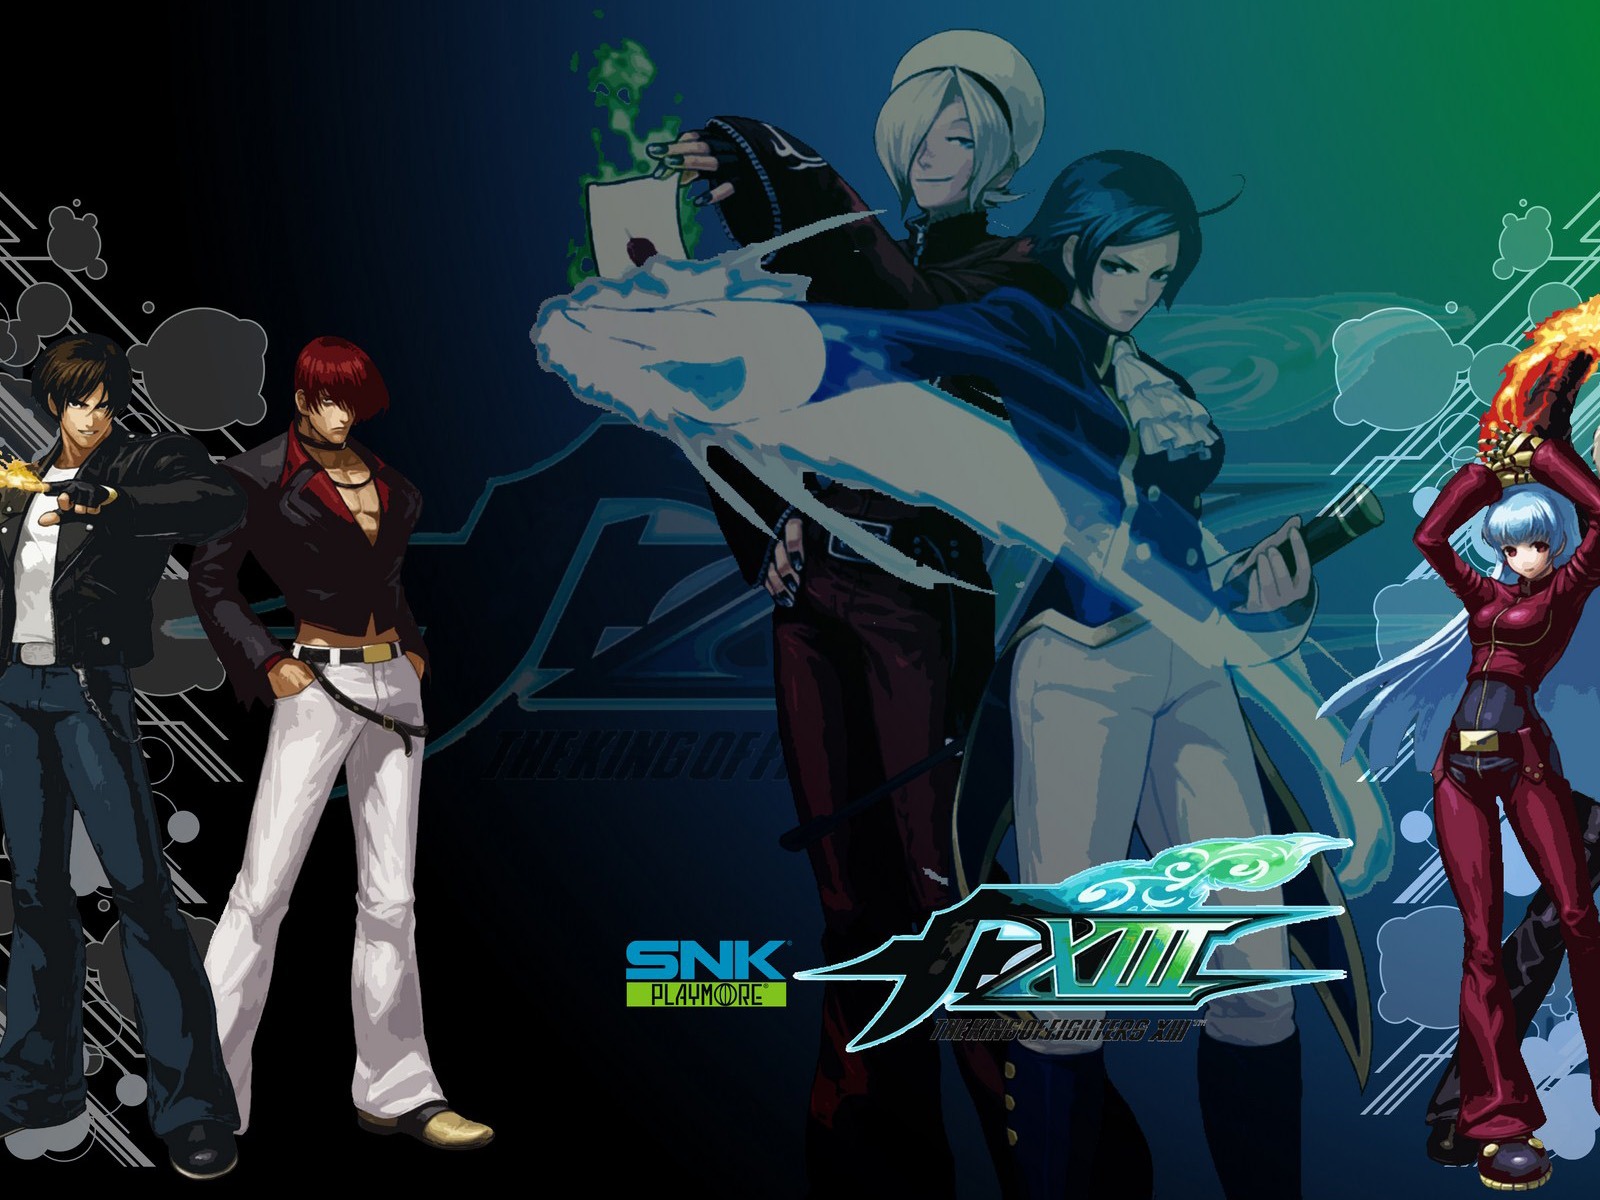 Le roi de wallpapers Fighters XIII #4 - 1600x1200